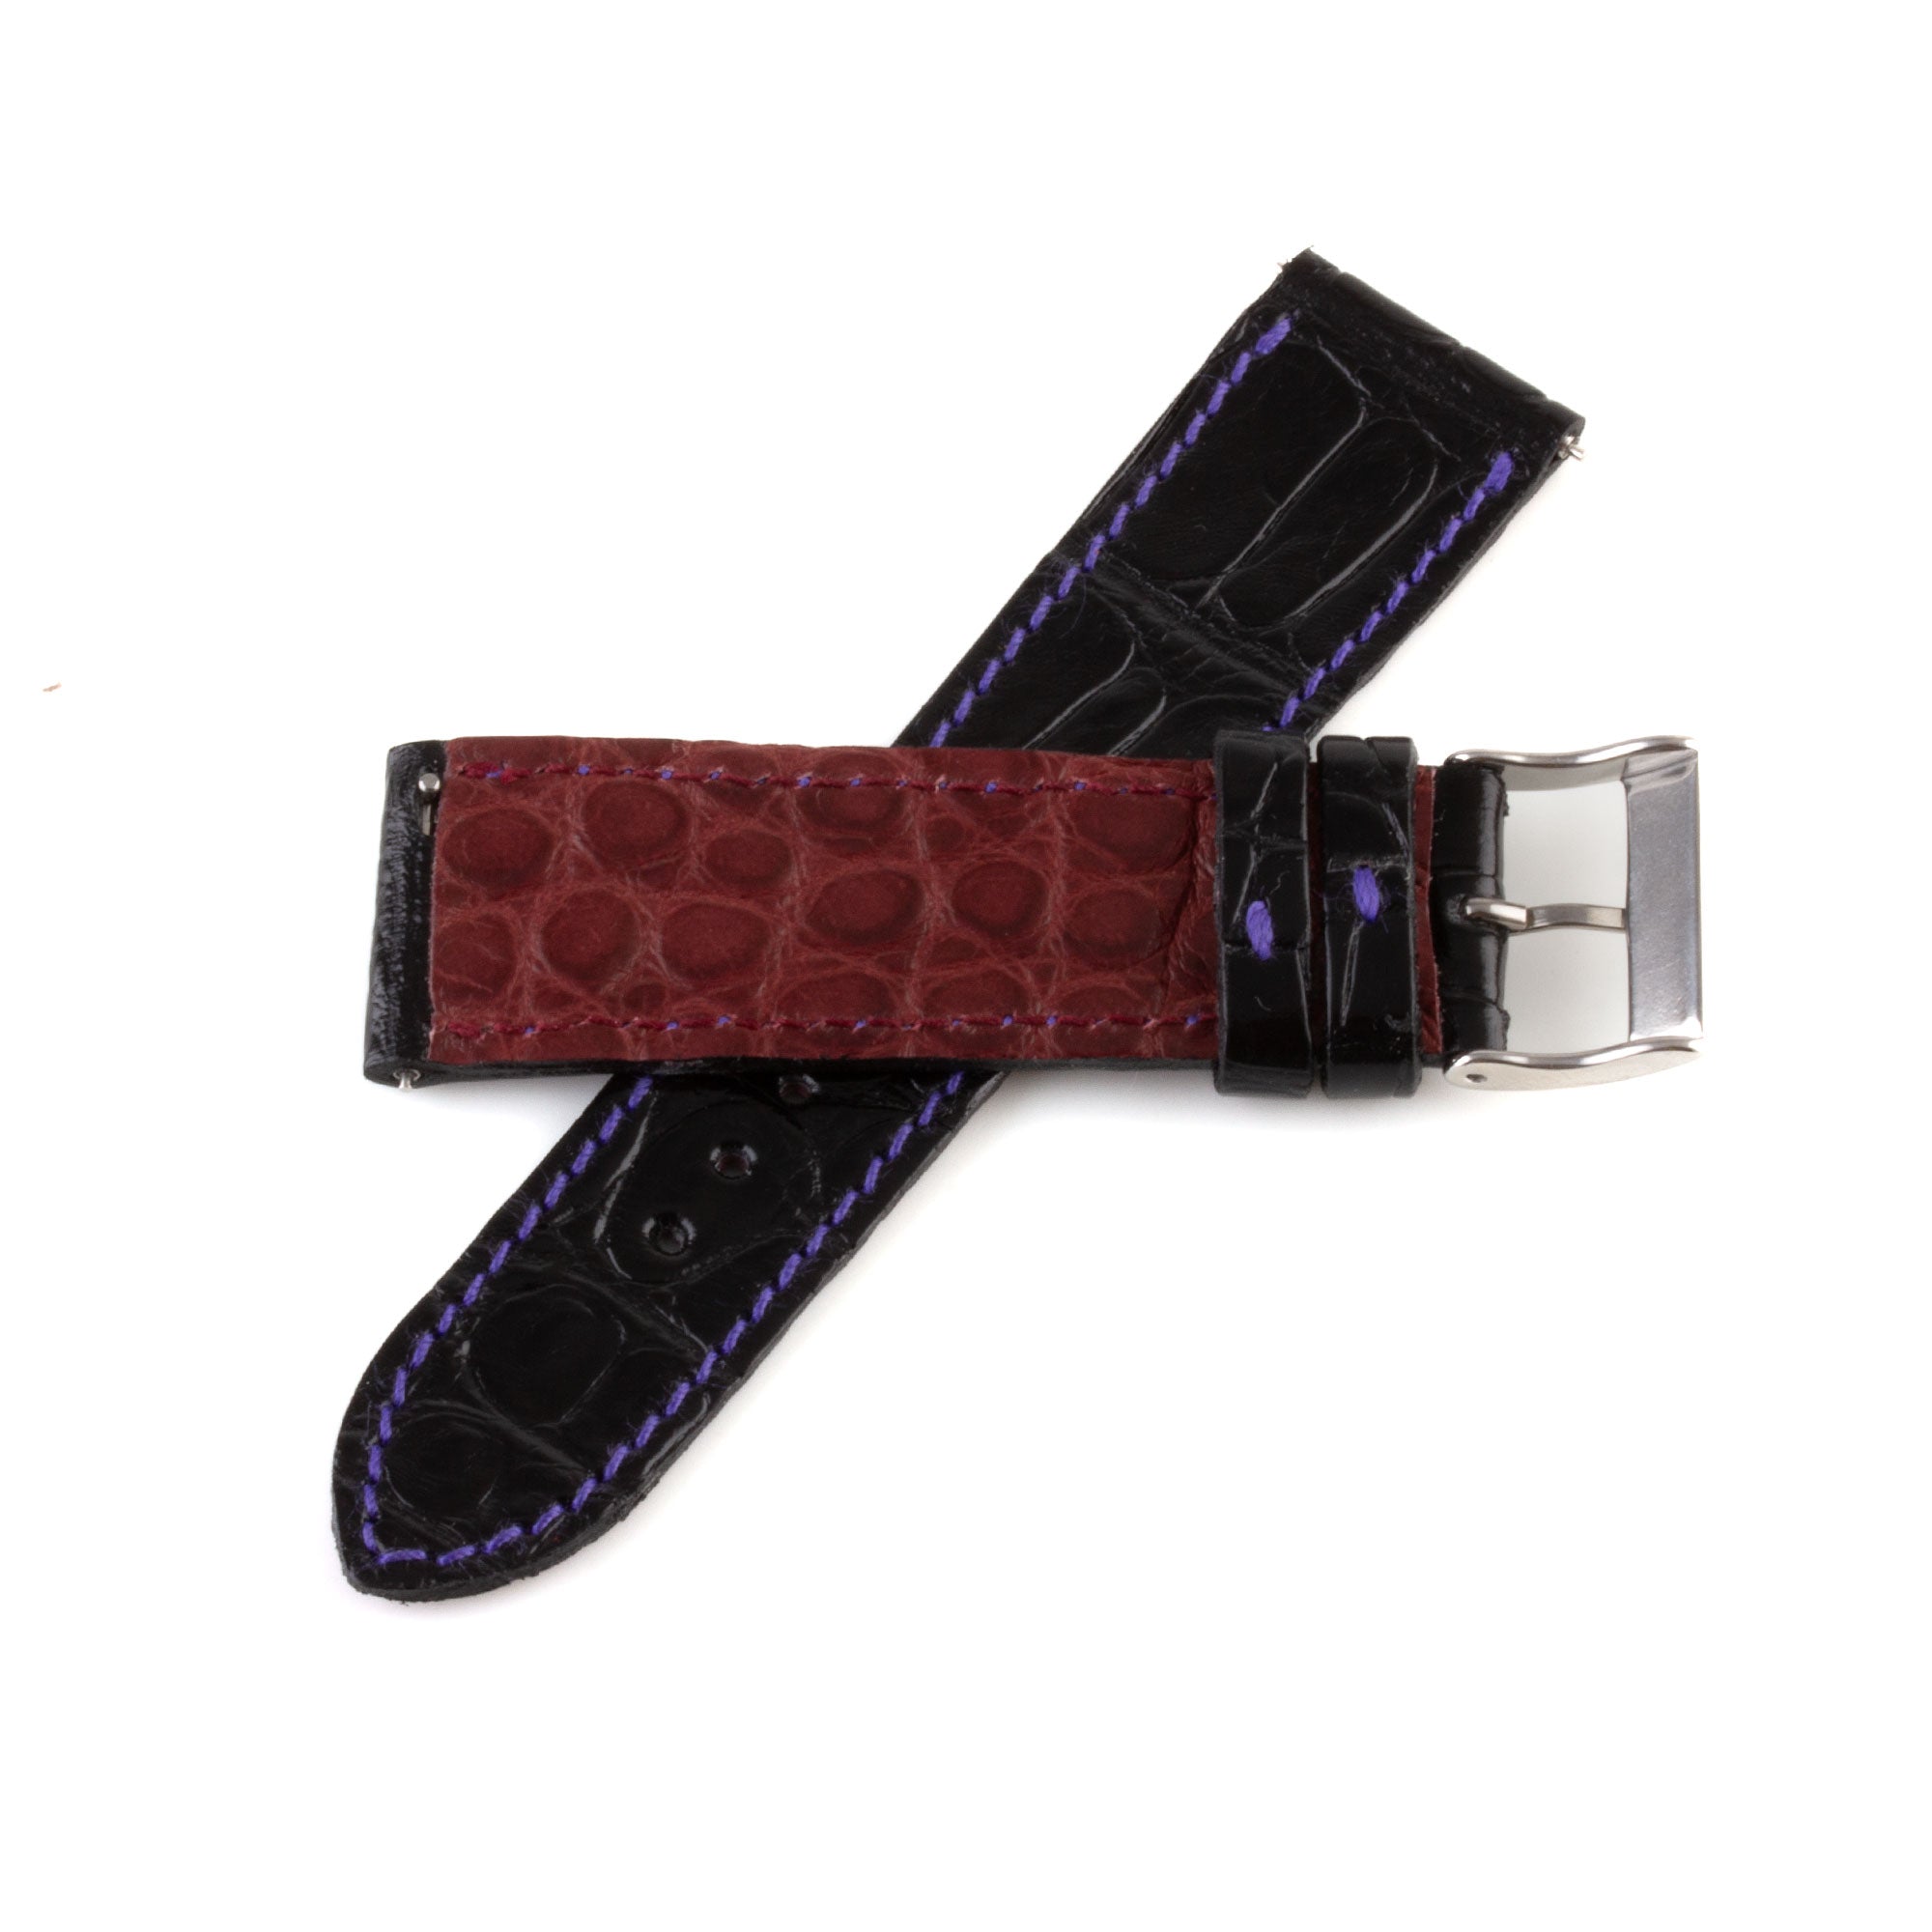 Alligator "Solo" leather watch band - 21mm width (0.83 inches) / Size M (n° 2)